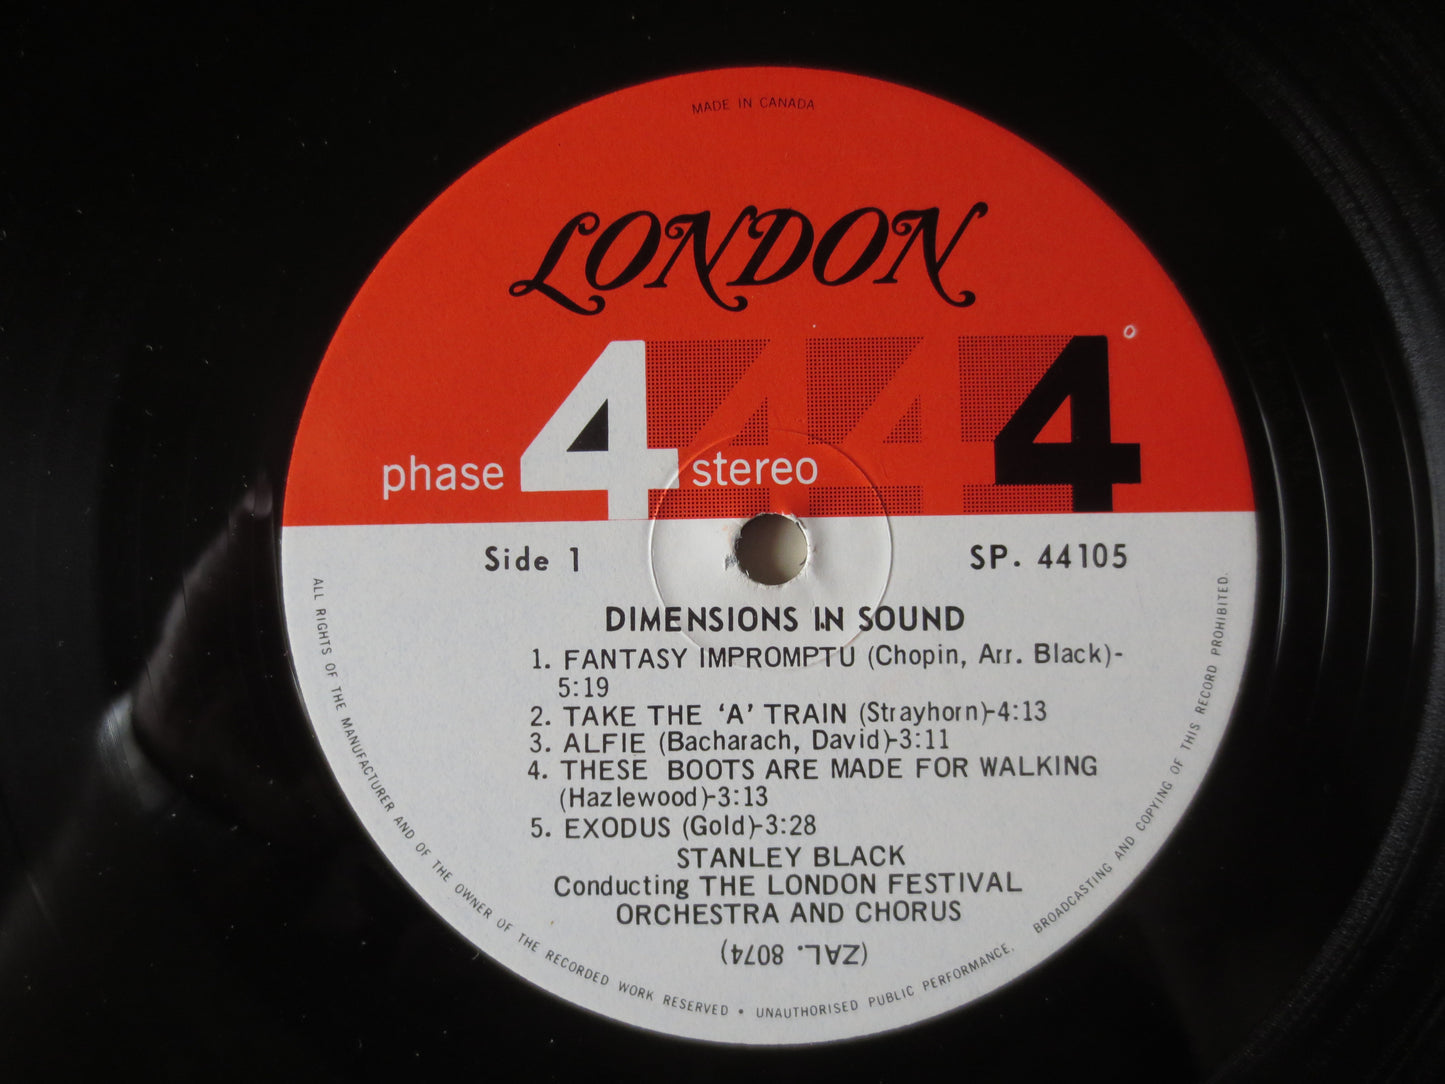 DIMENSIONS in SOUND, Phase 4 Records, STANLEY Black, Orchestra Records, Stanley Black Albums, Vinyl Album, Lps, 1968 Record